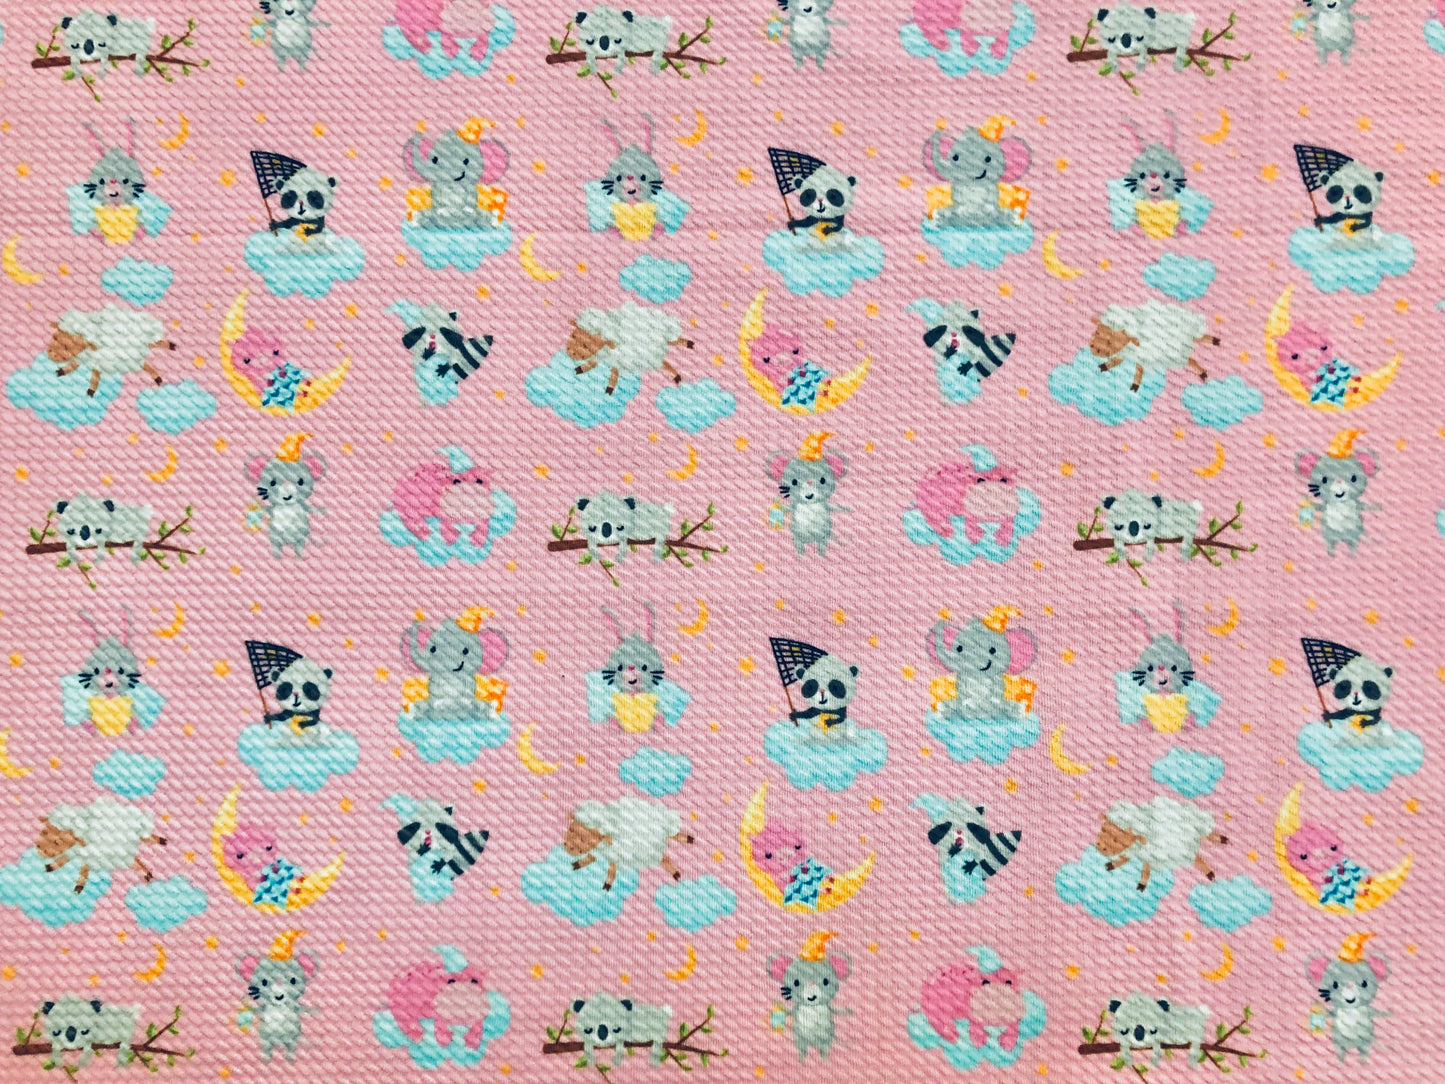 Bullet Knit Printed Fabric-Pink Blue Clouds and Pandas-BPR204-Sold by the Yard-Bulk Available